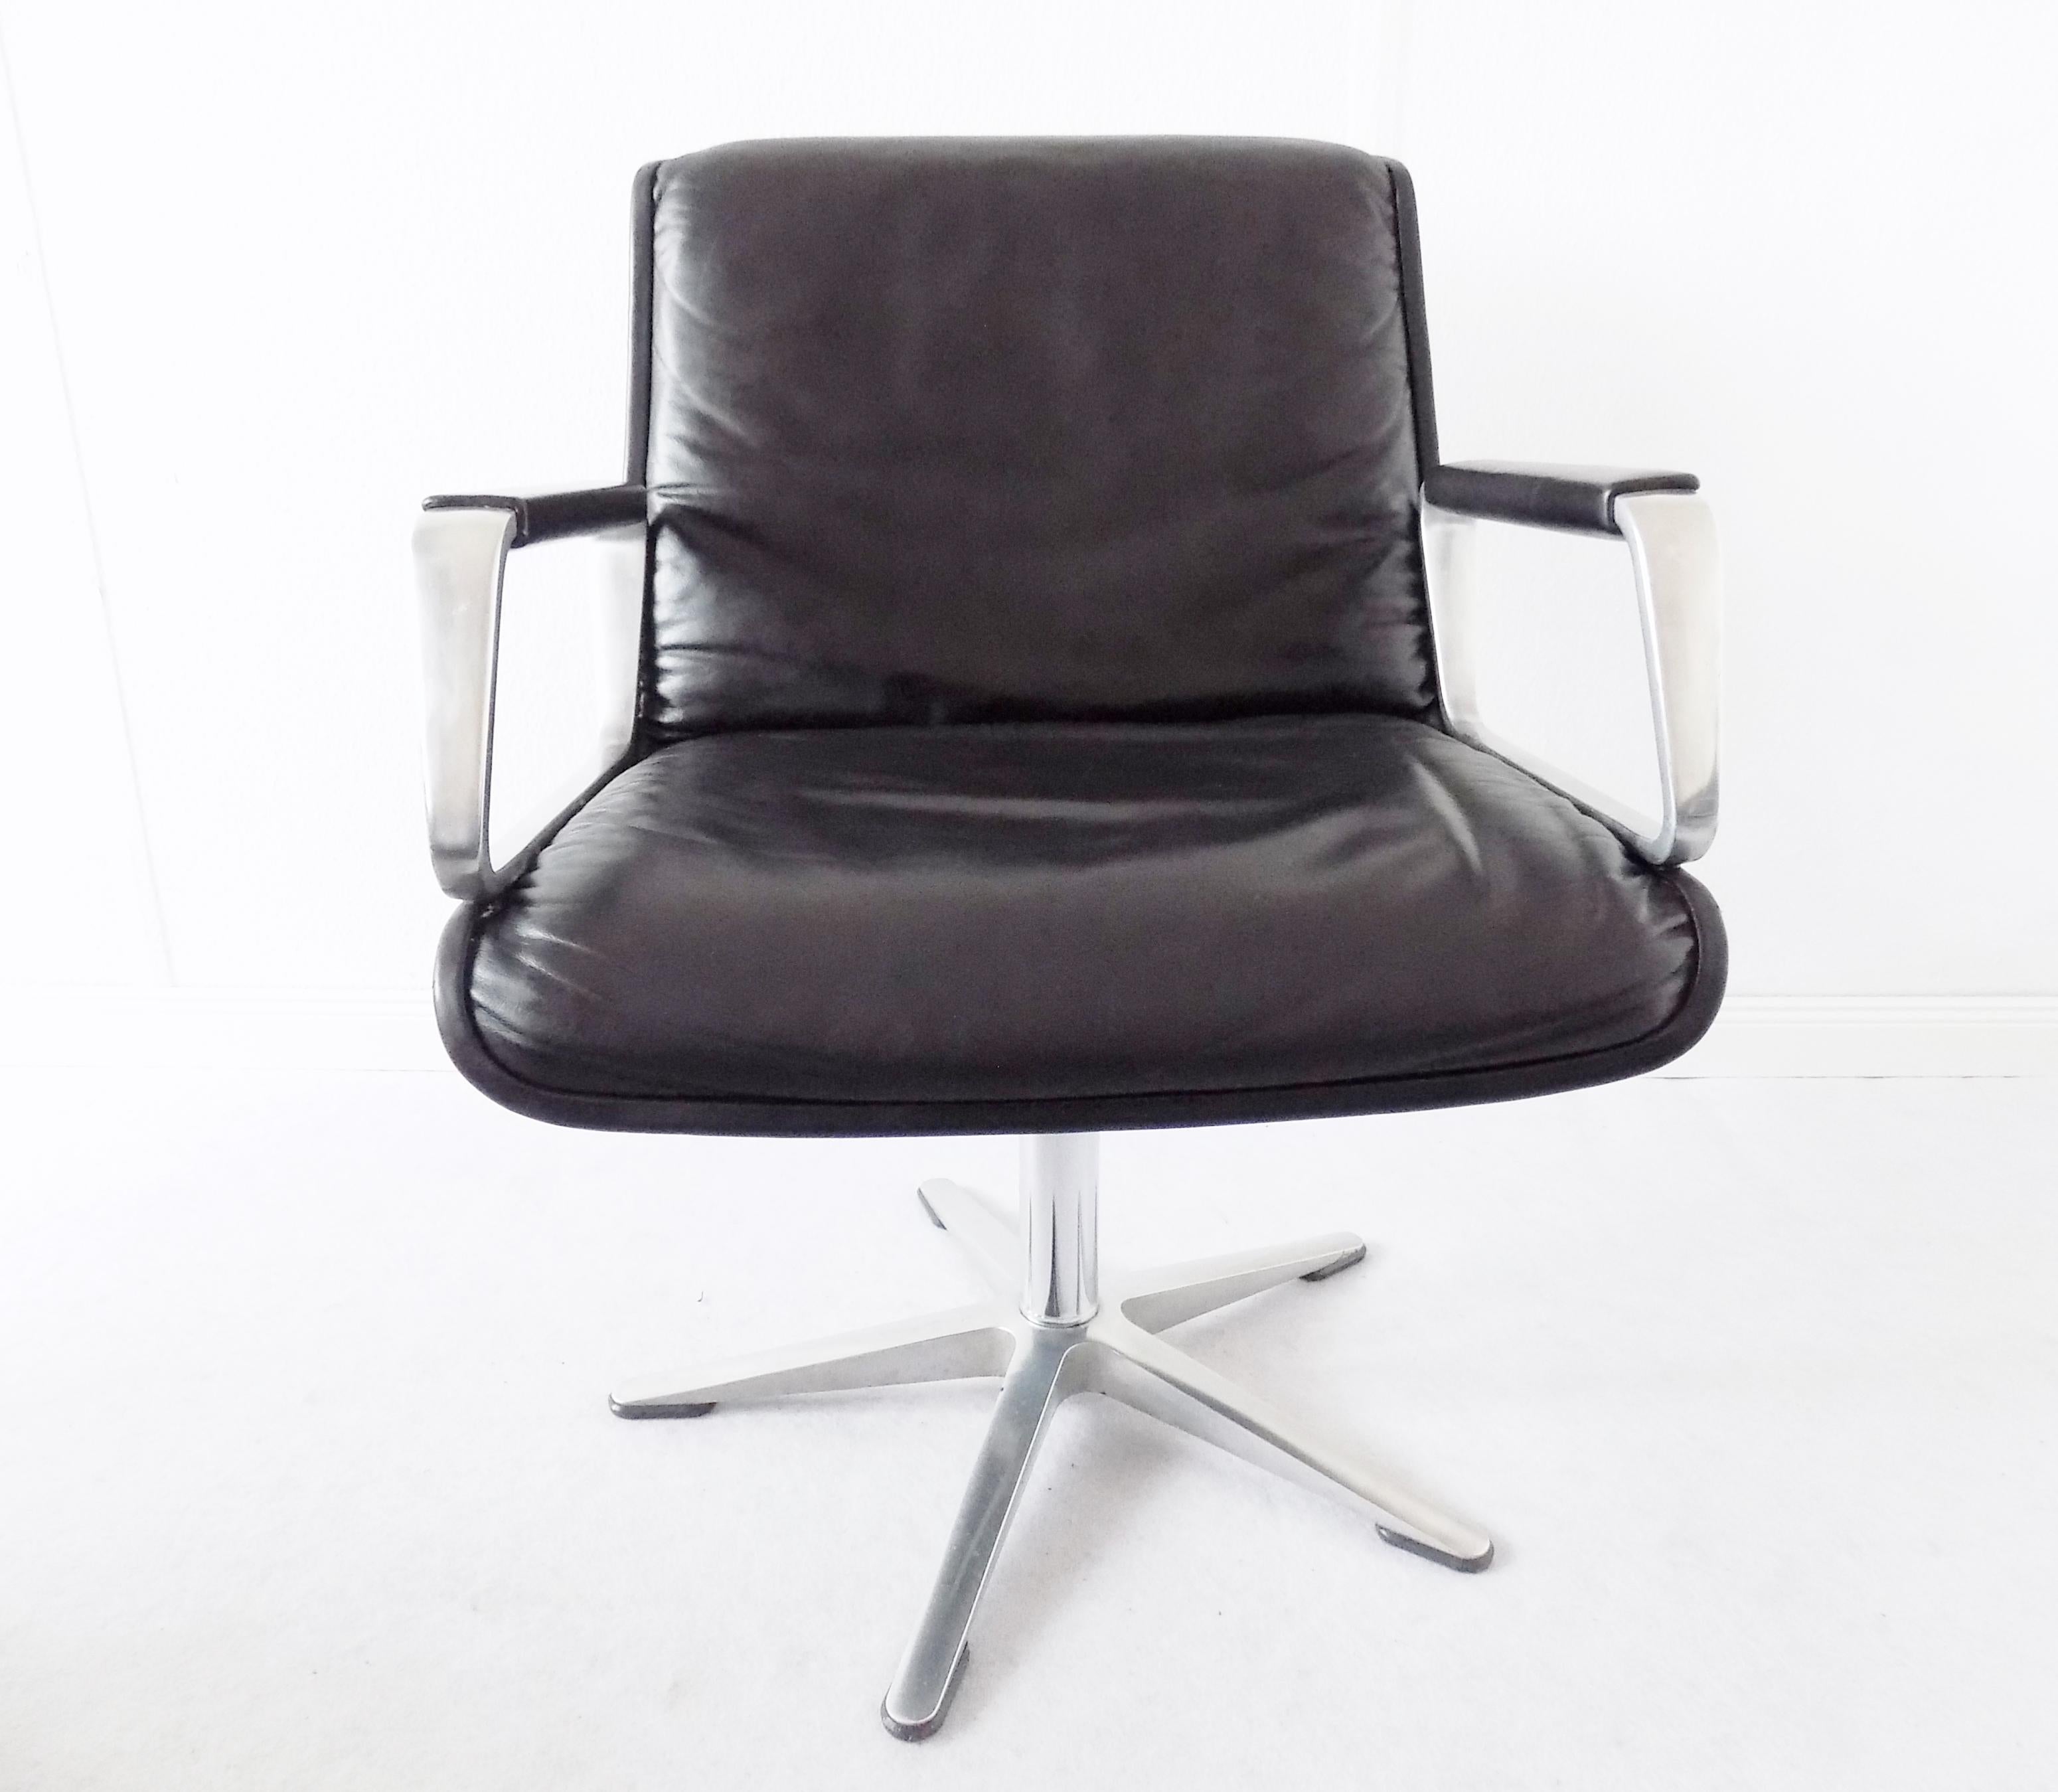 Wilkhahn Delta 2000 by Delta Group Set of 4 Chairs, Black Leather, Midcentury 3